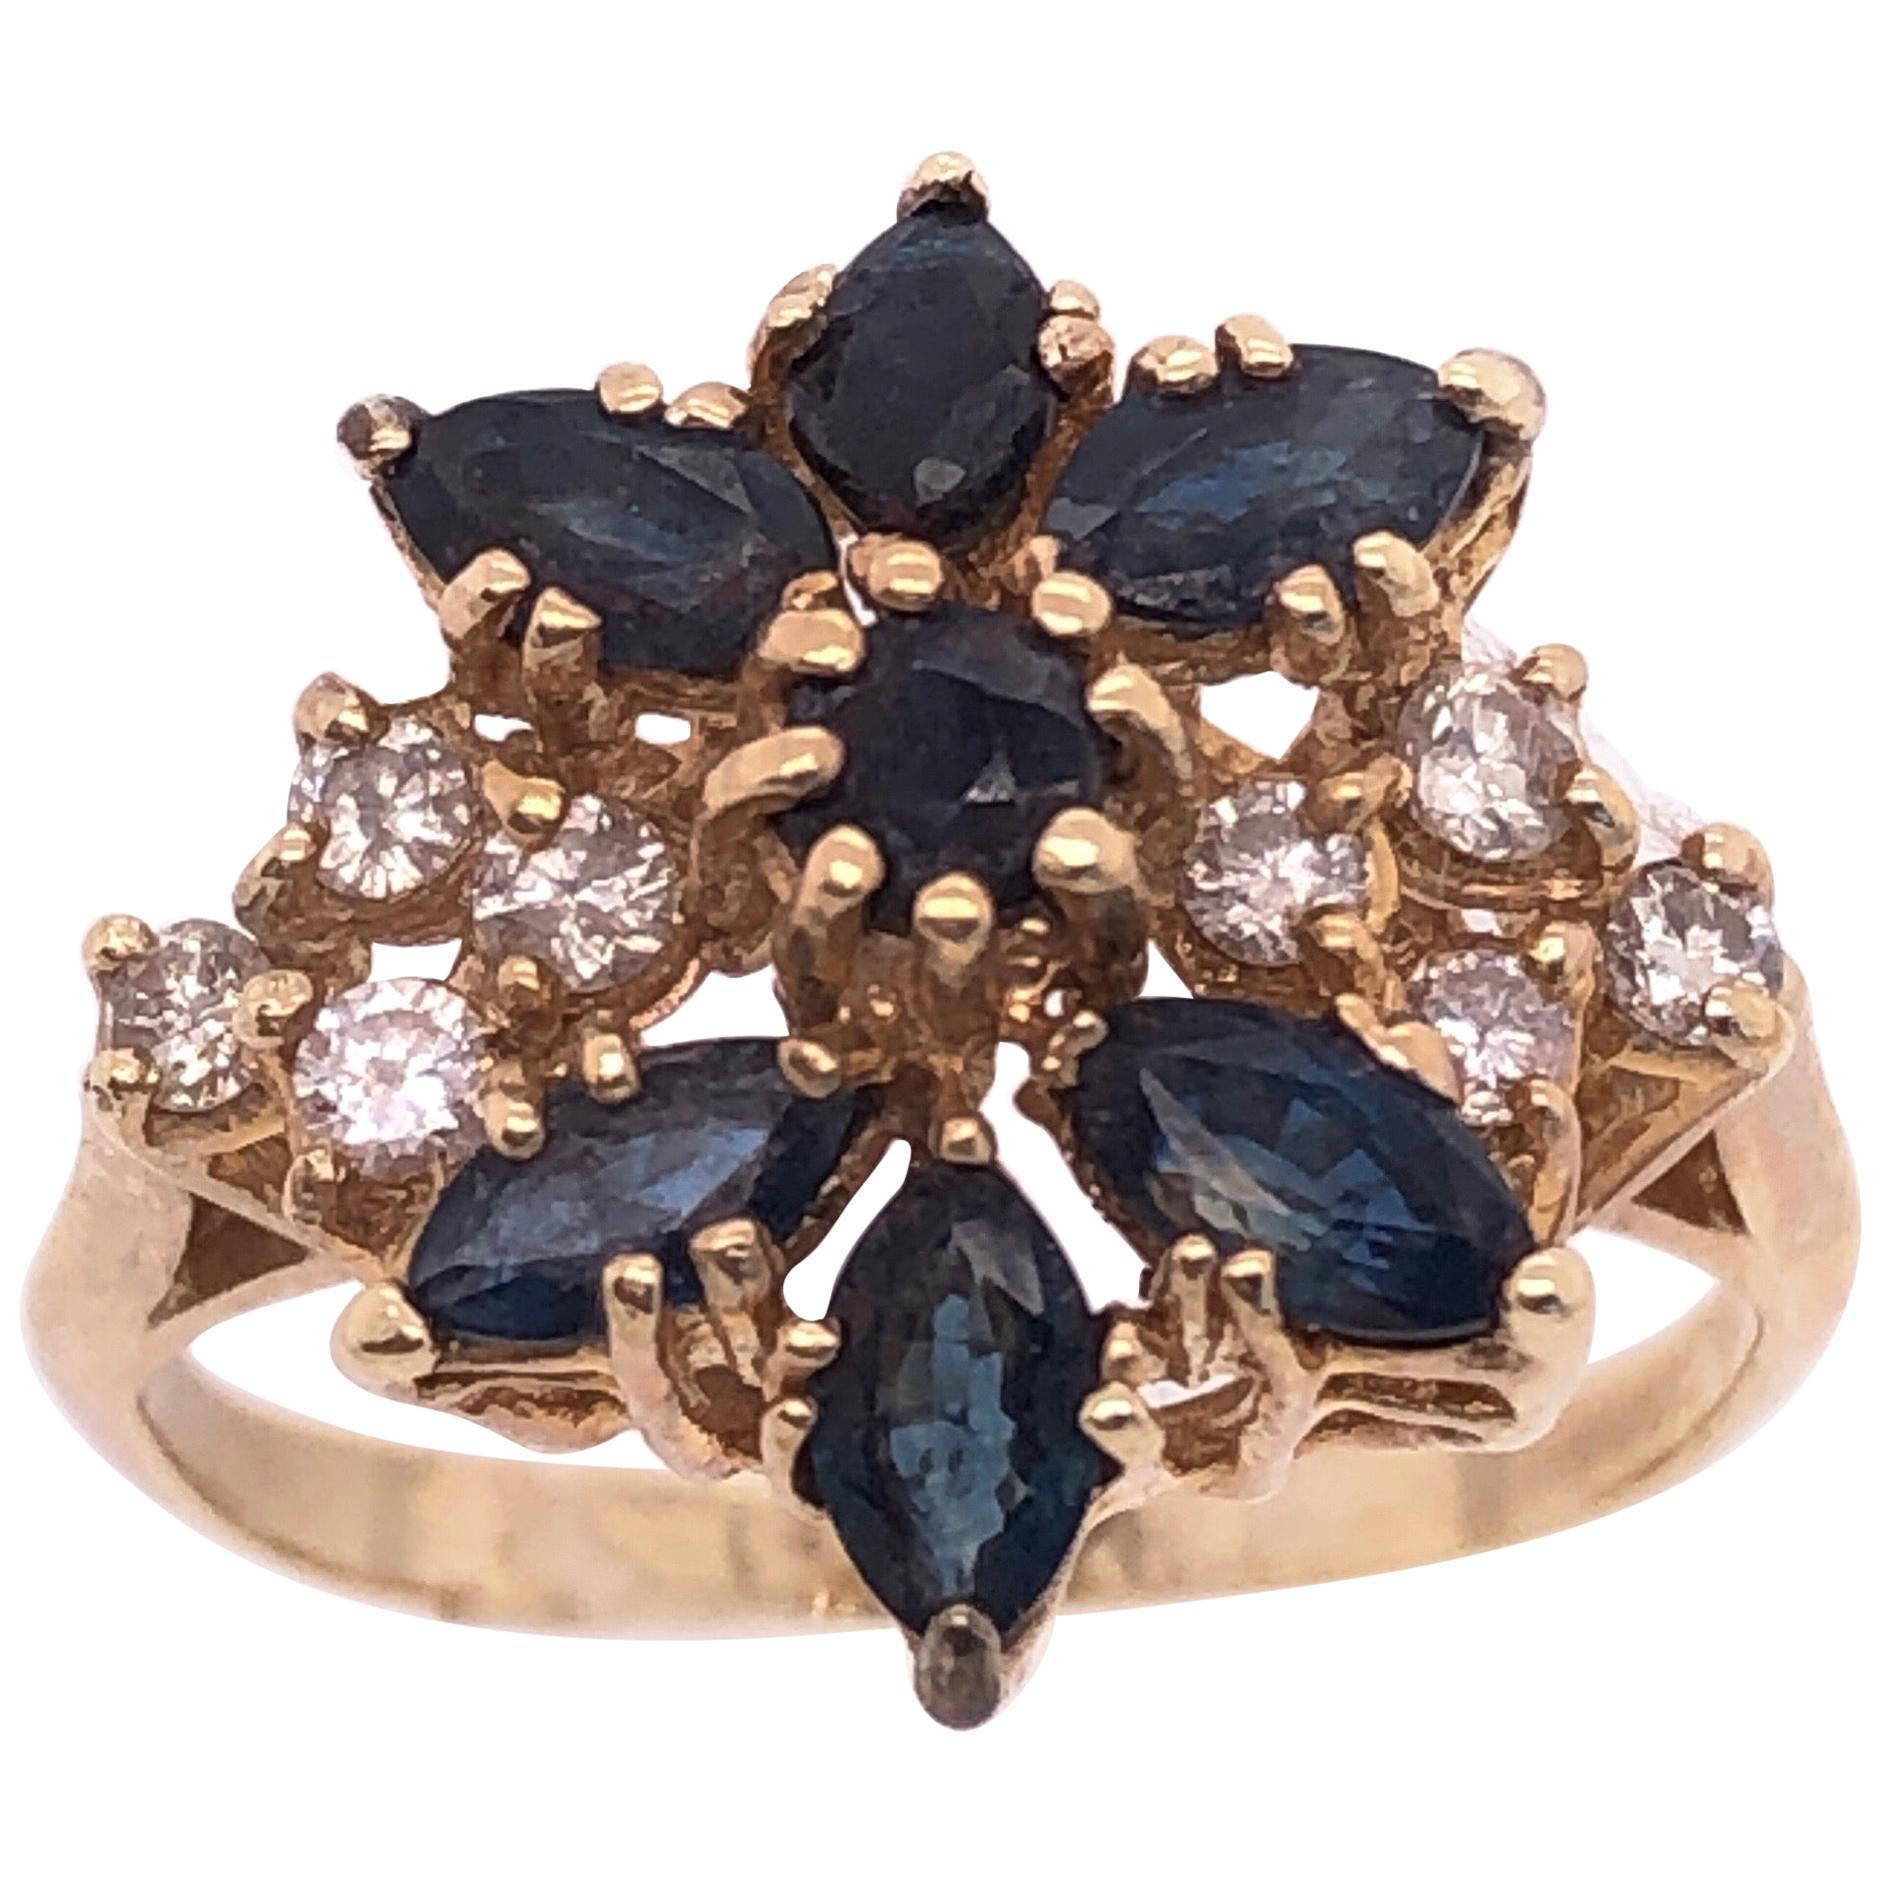 14 Karat Yellow Gold Cluster Ring with Onyx and Diamonds